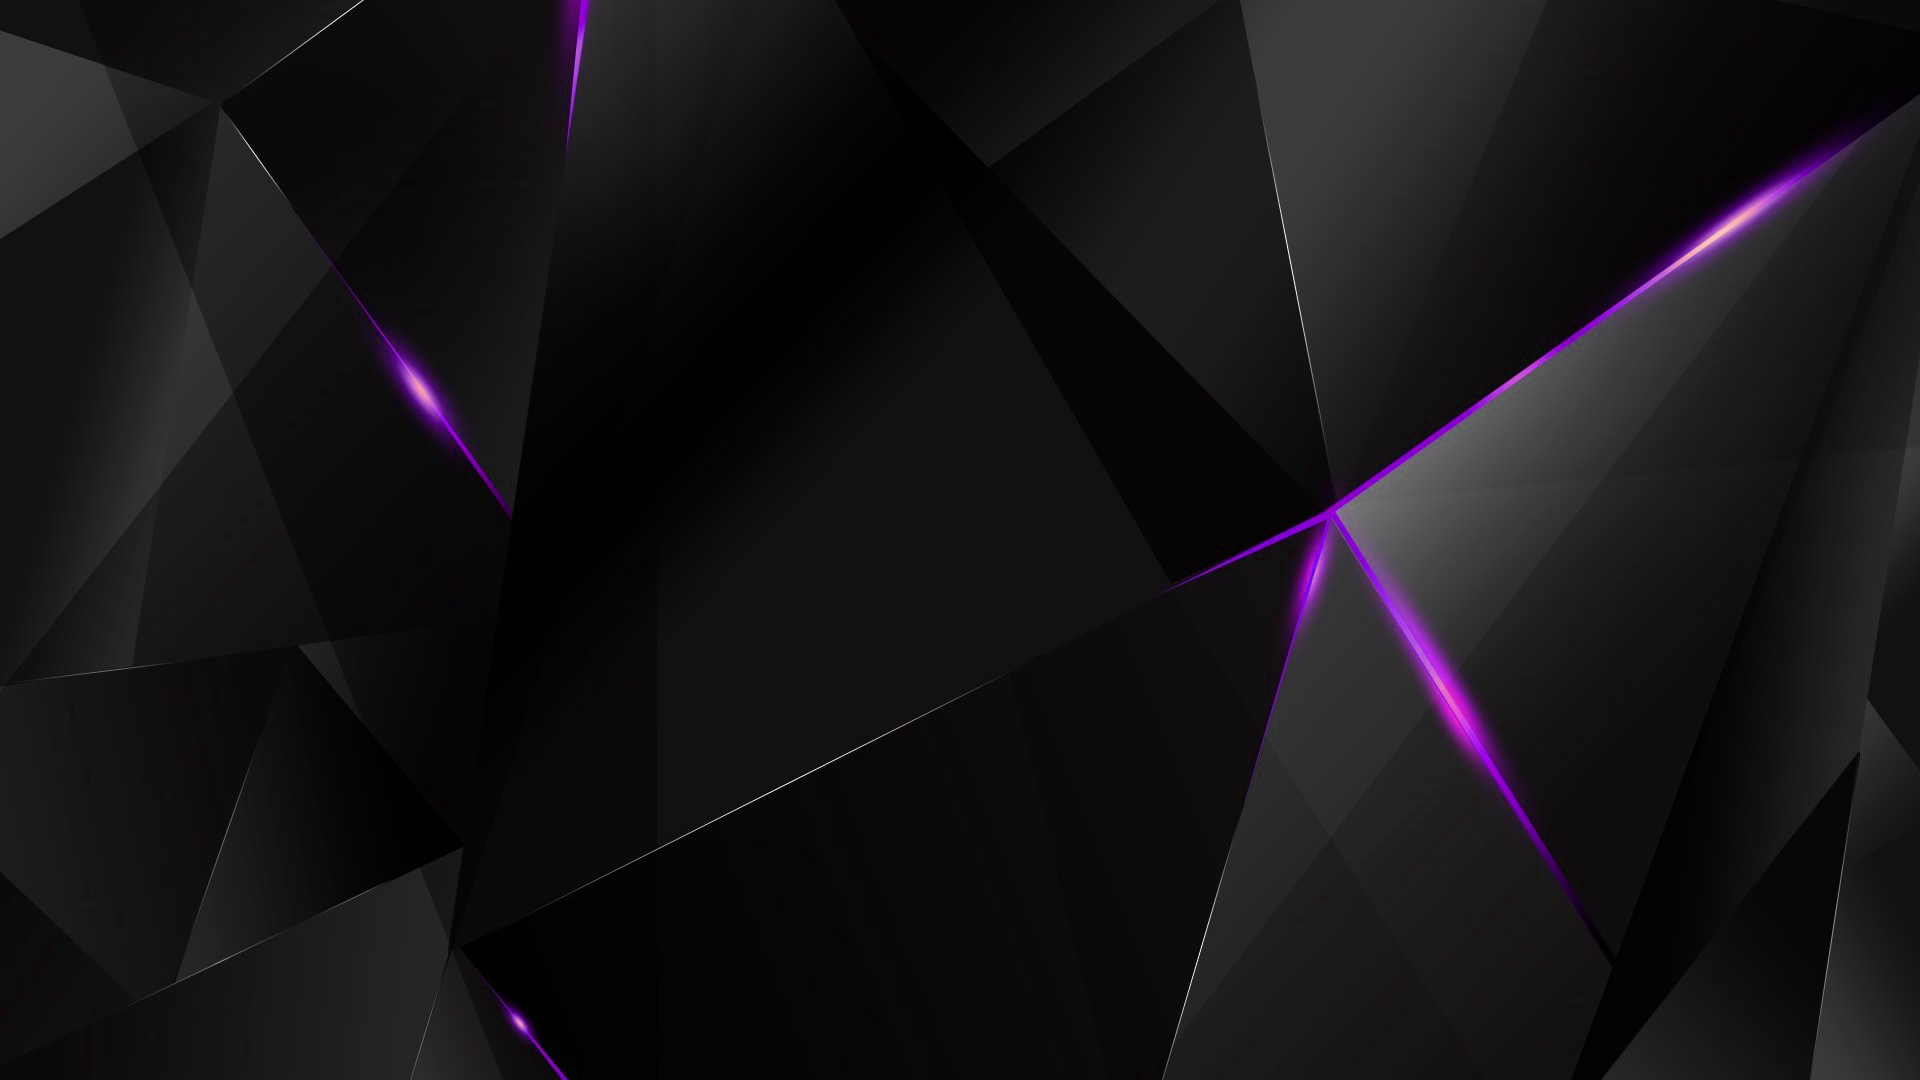 Wallpapers - Purple Abstract Polygons (Black BG) by kaminohunter on  DeviantArt